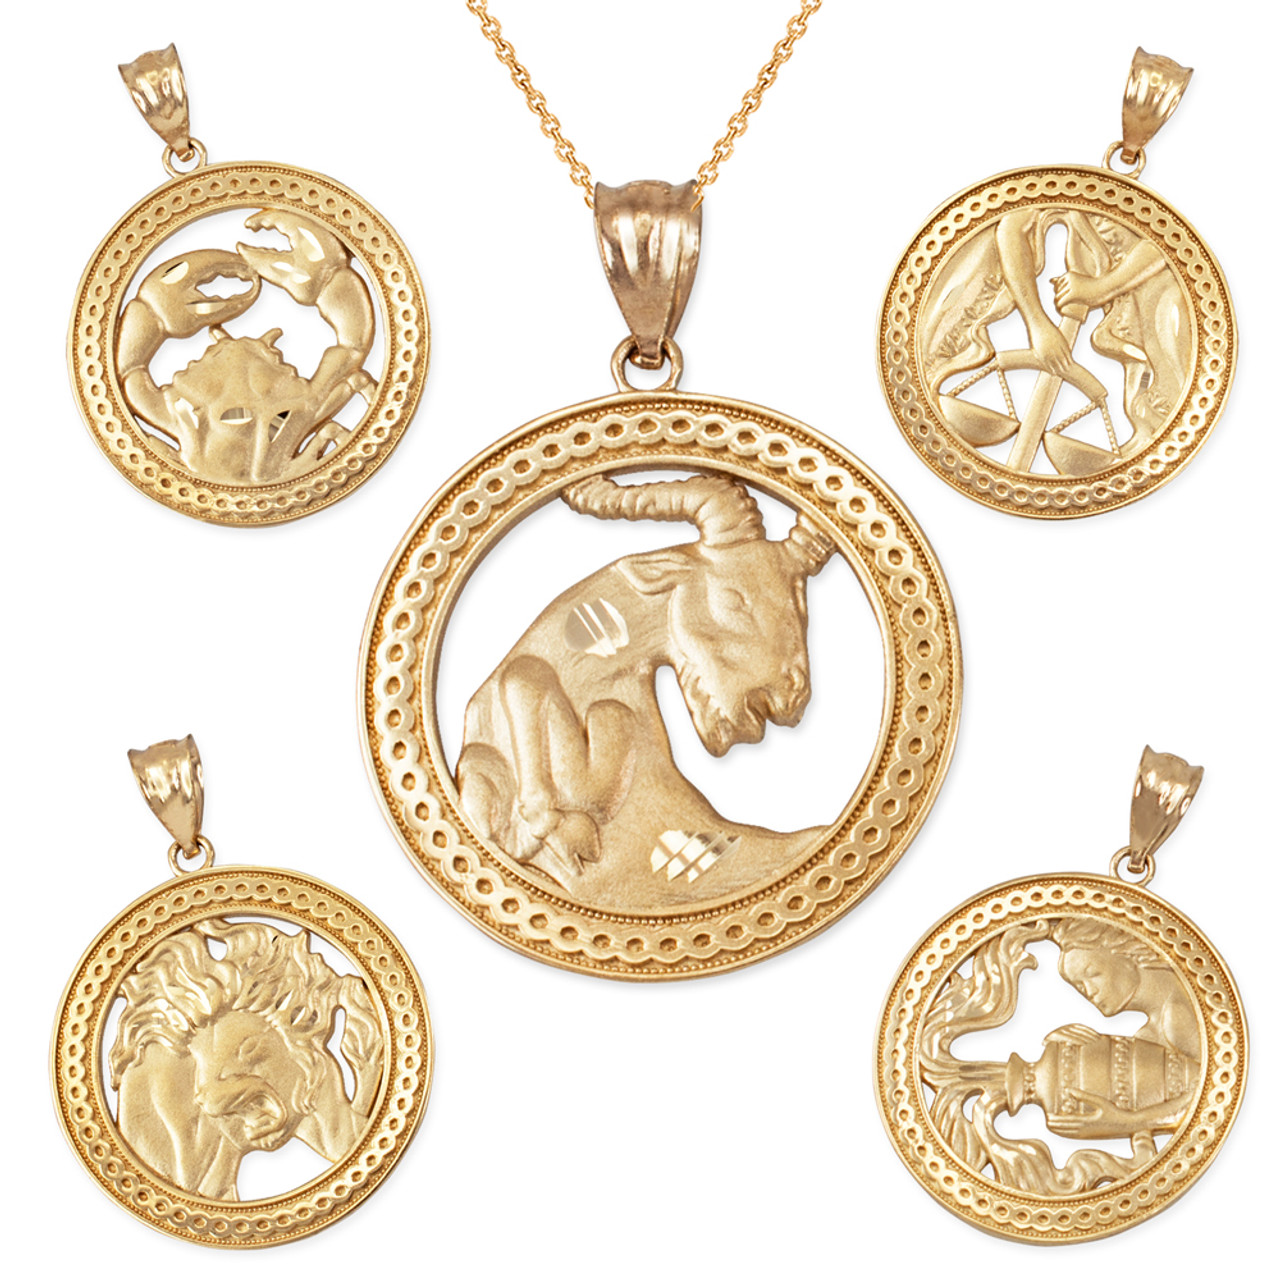 WHITE GOLD LEO ZODIAC SIGN IN CIRCLE ROPE PENDANT NECKLACE Gold Purity 14K 